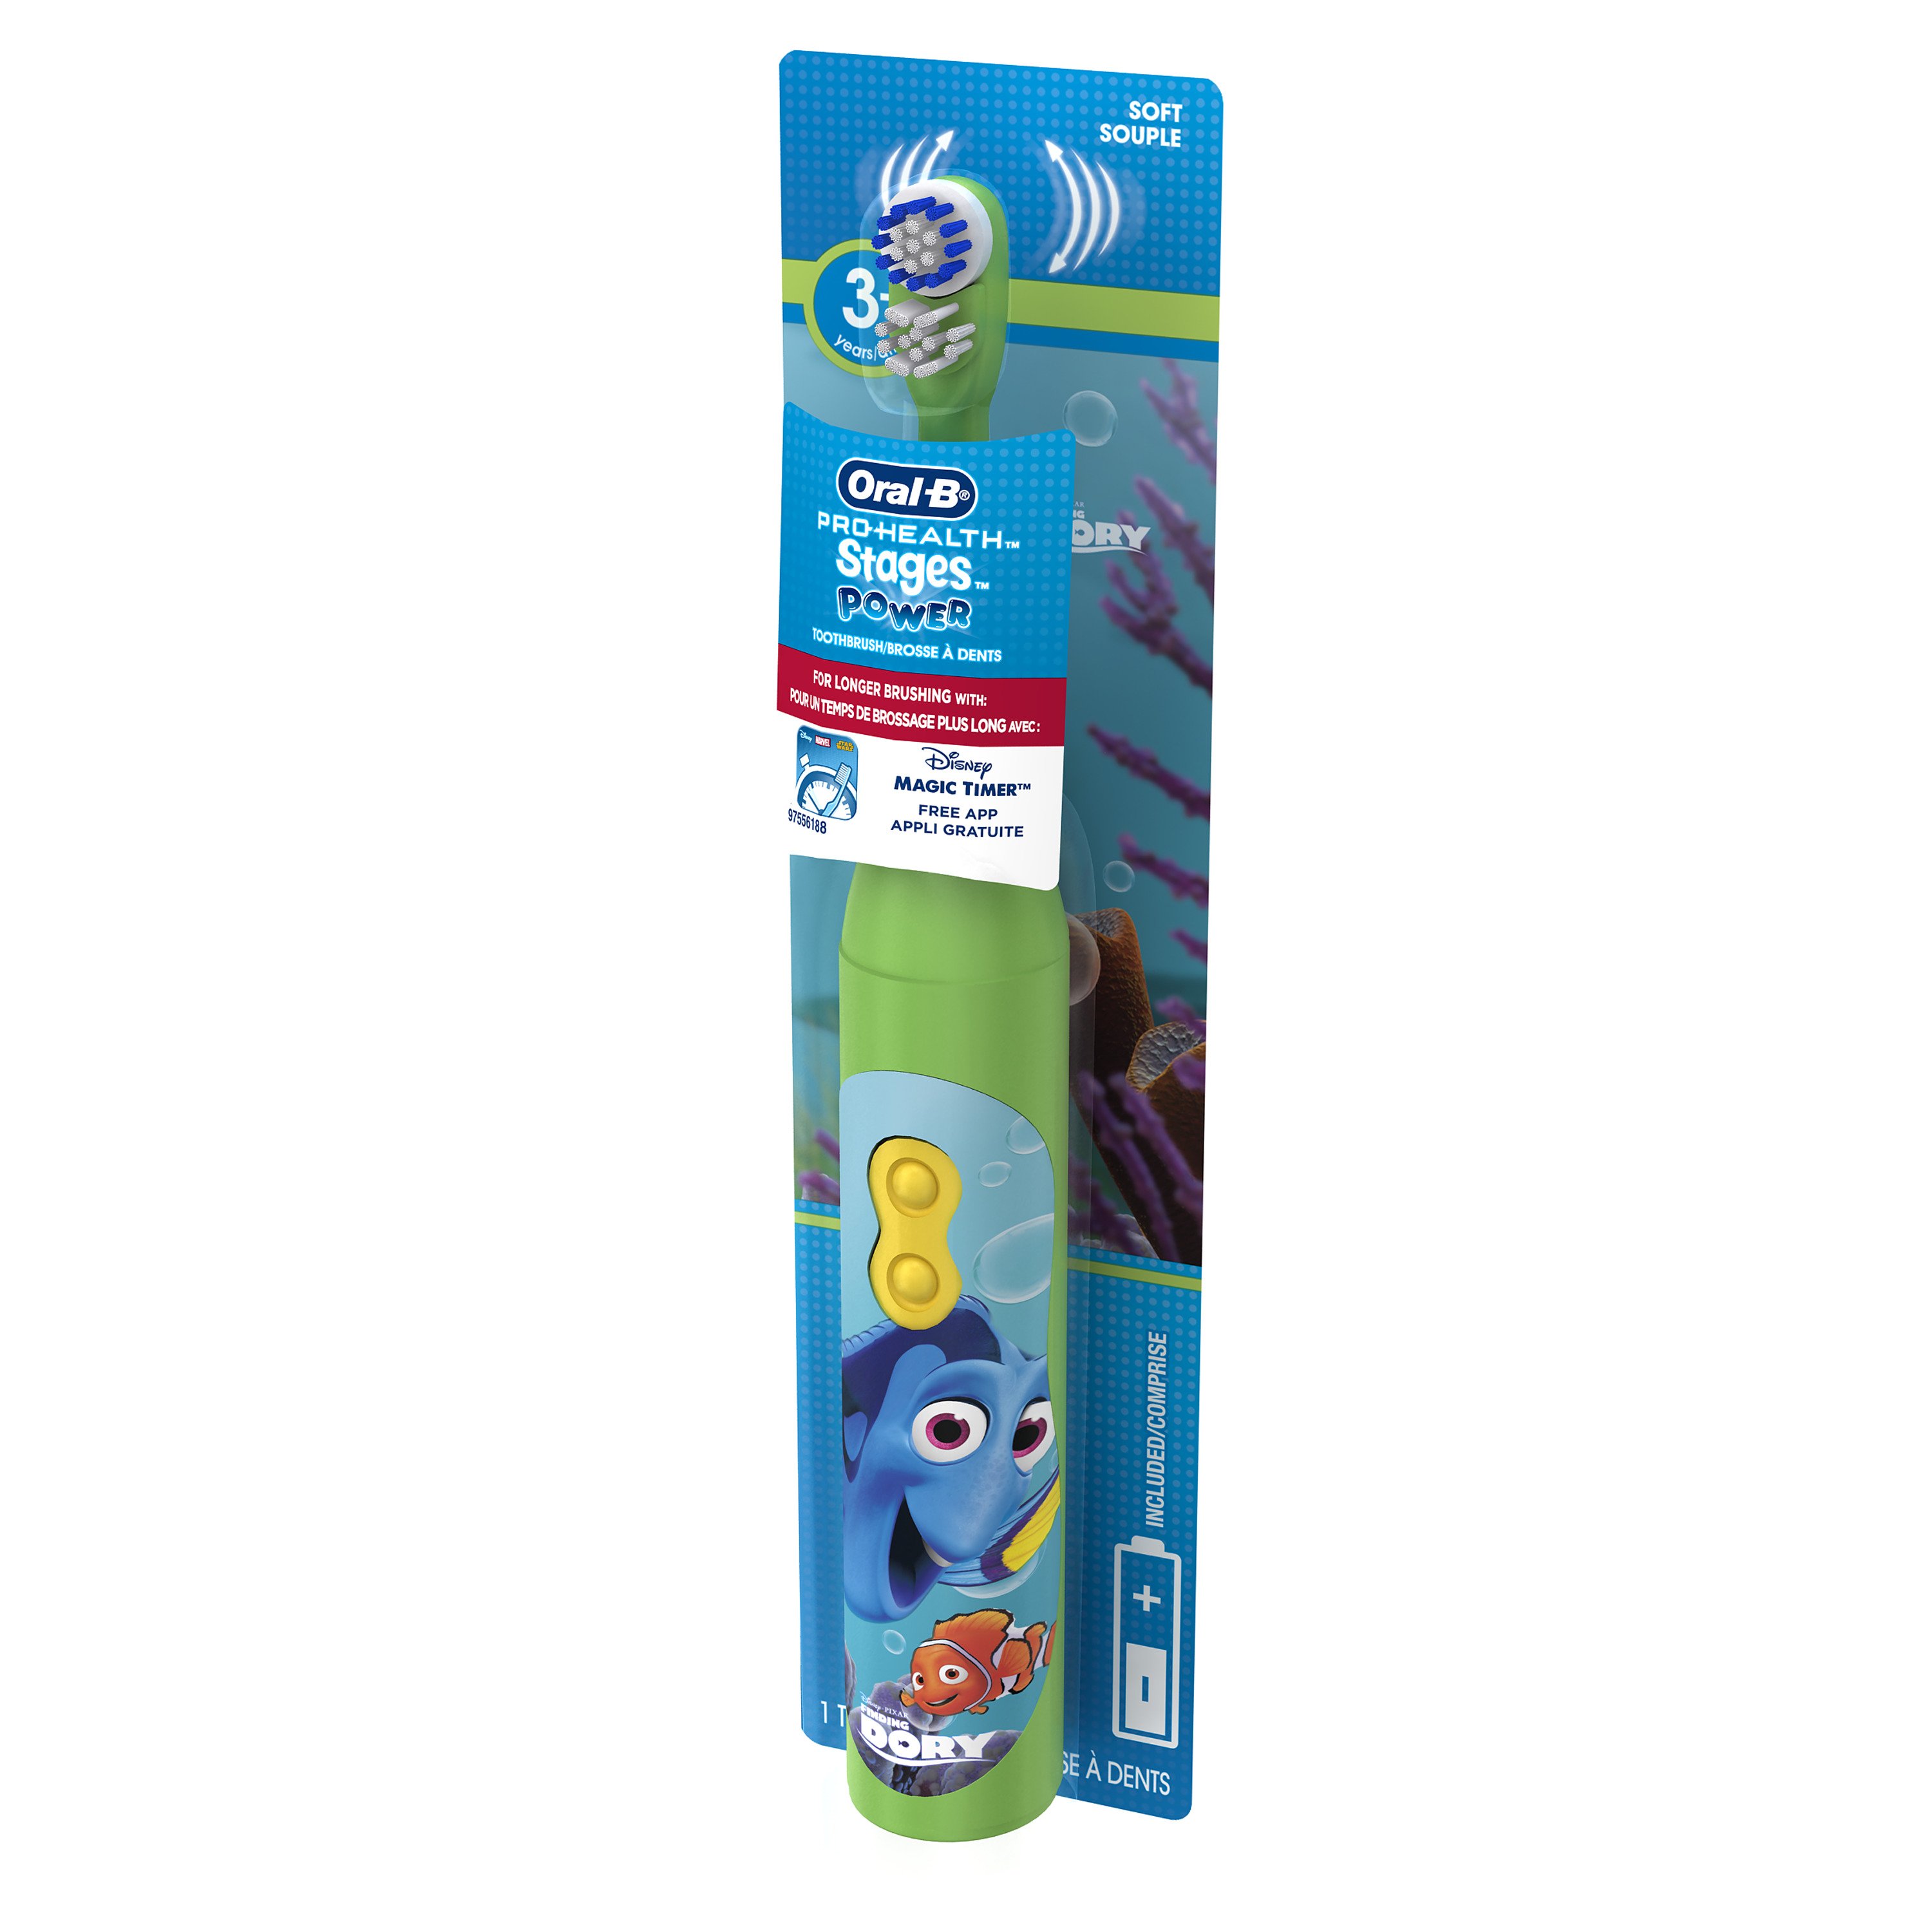 Oral-B Kids Pro-Health Stages Finding Dory Battery Electric Toothbrush - image 3 of 6